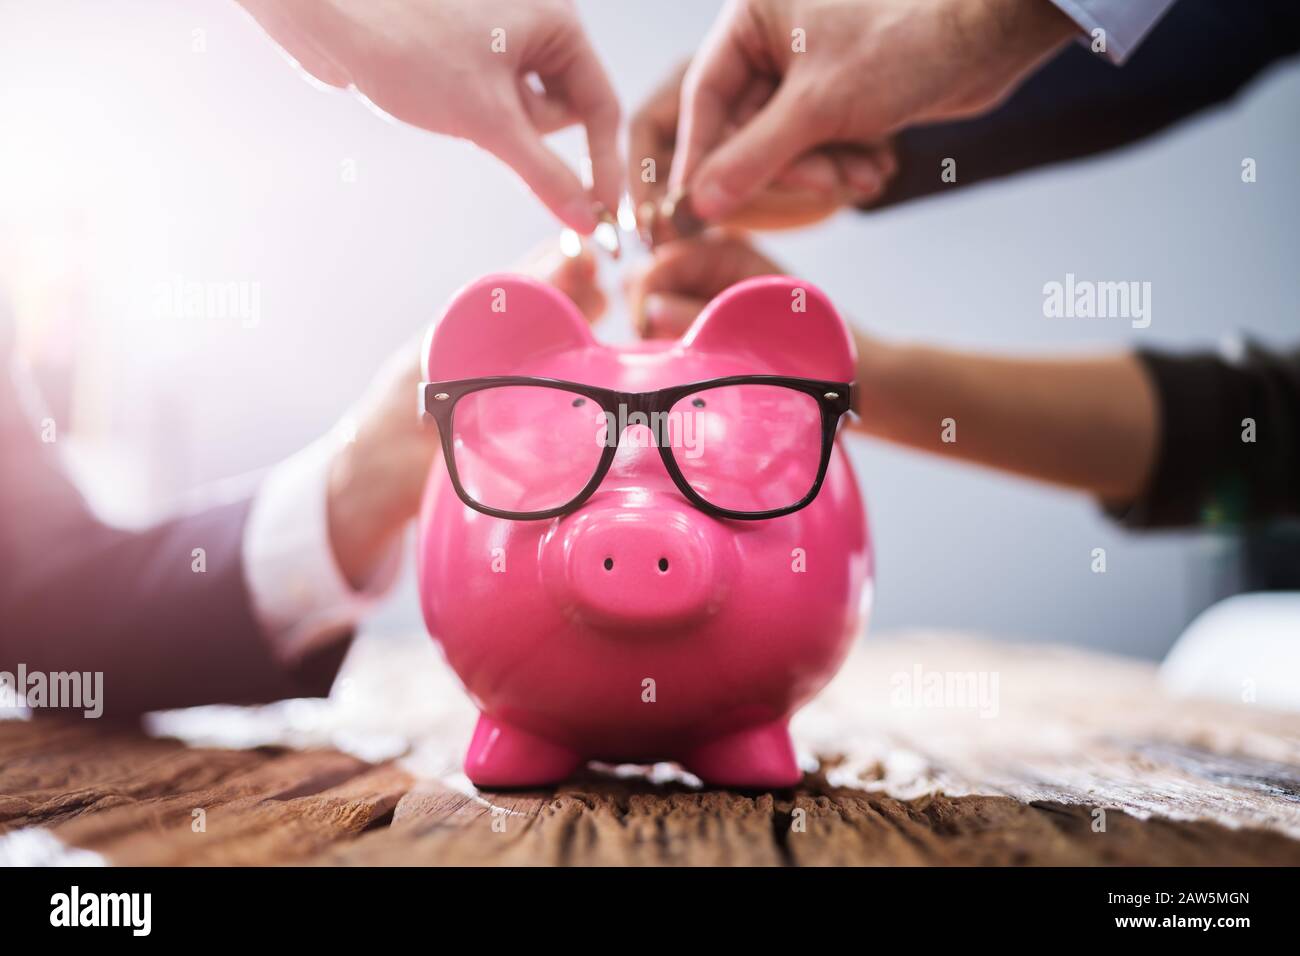 Businesspeople's Hand Inserting Coins Into Pink Piggybank In Office Stock Photo